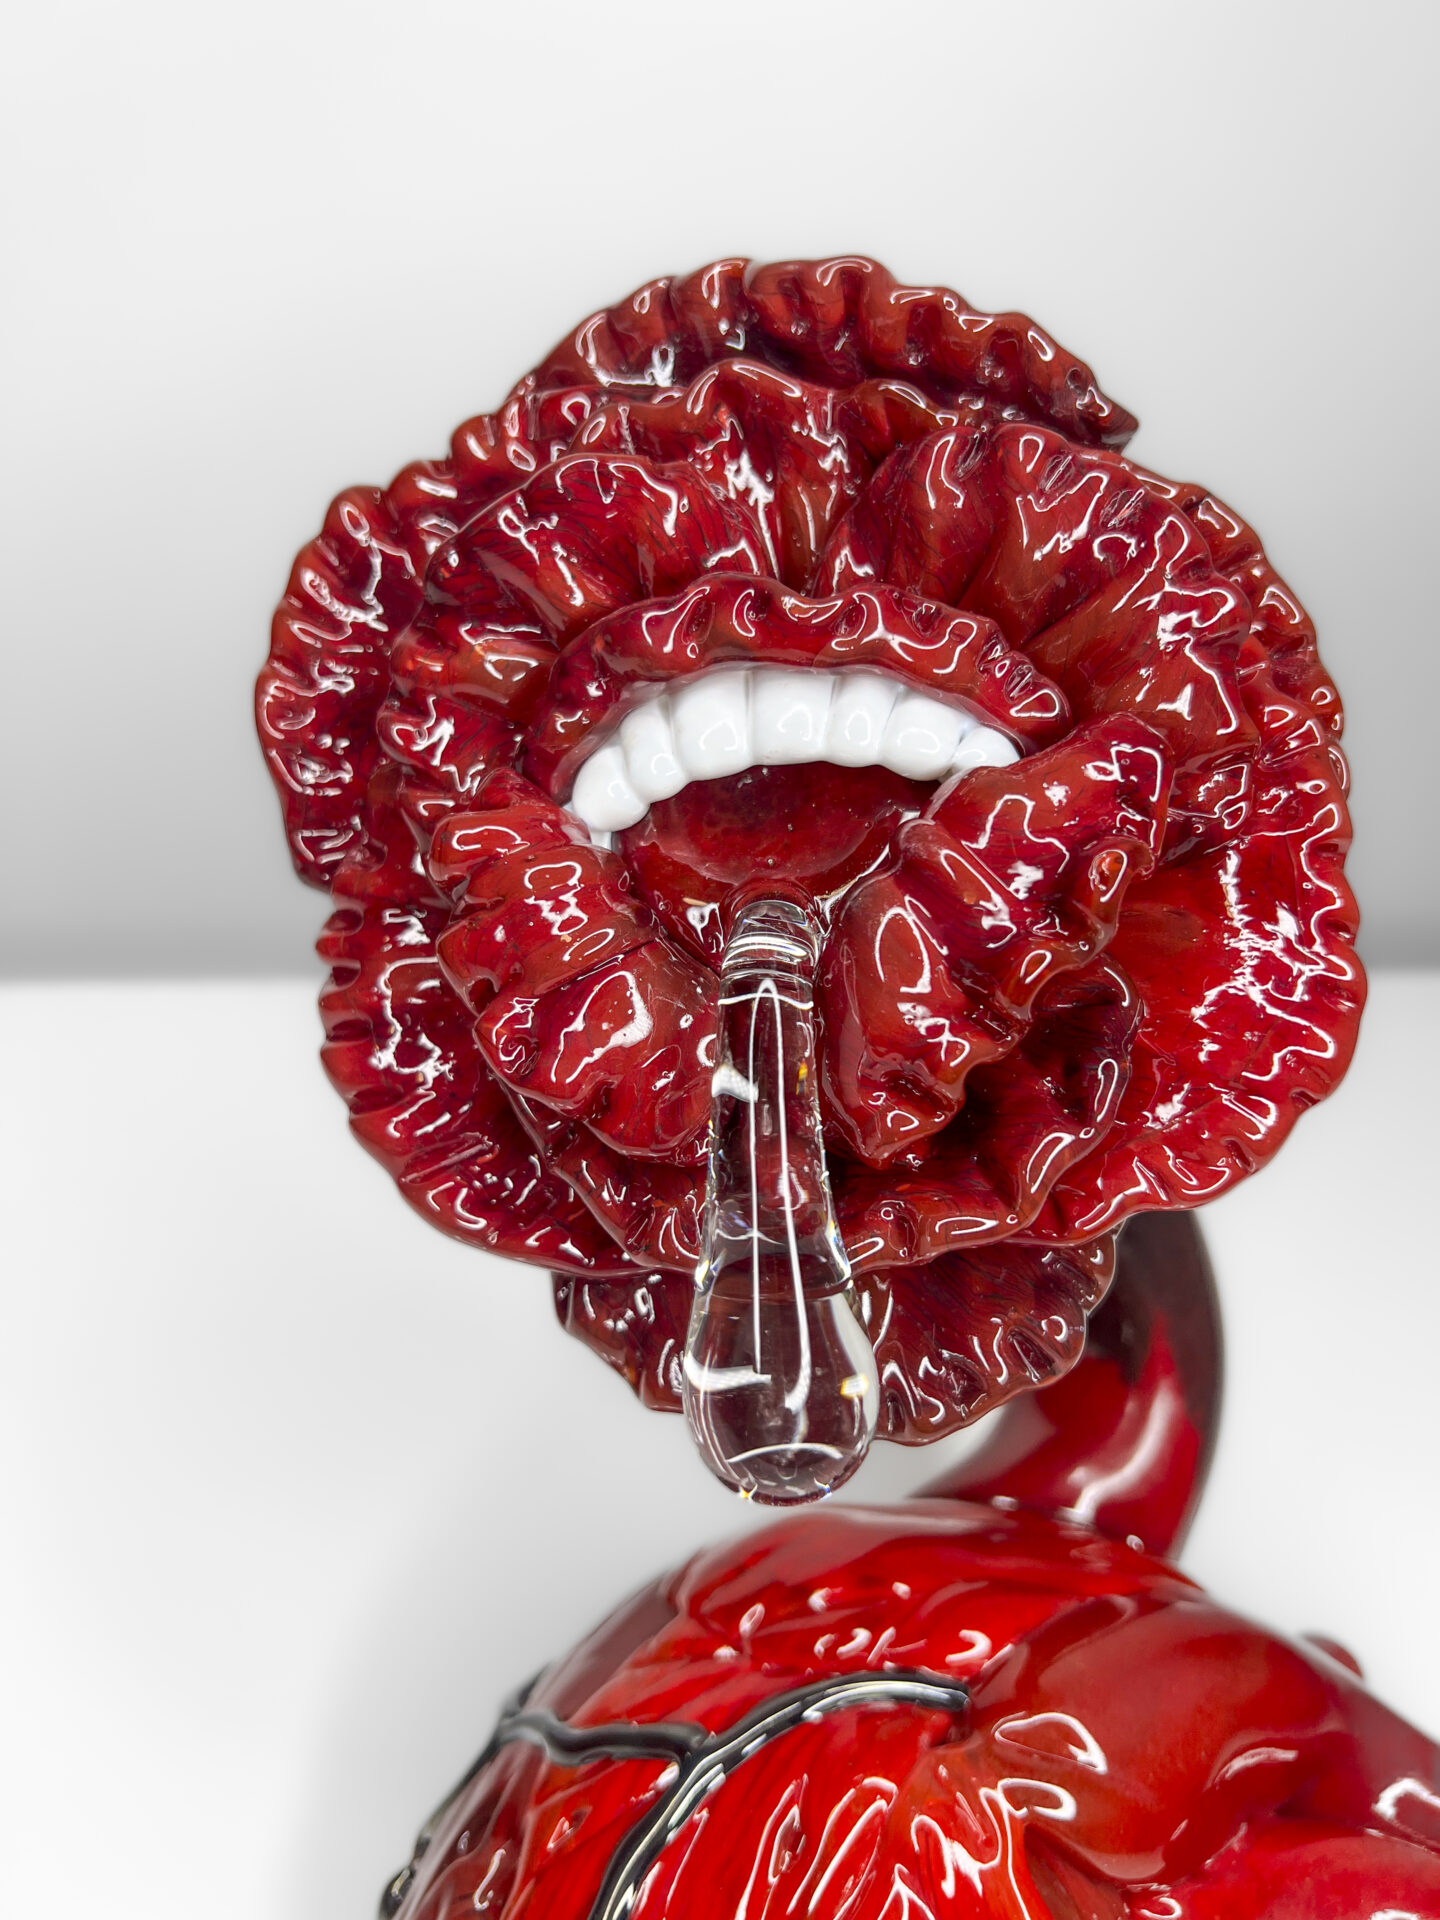 Love or Lust? Glass Sculpture by MiNHi England